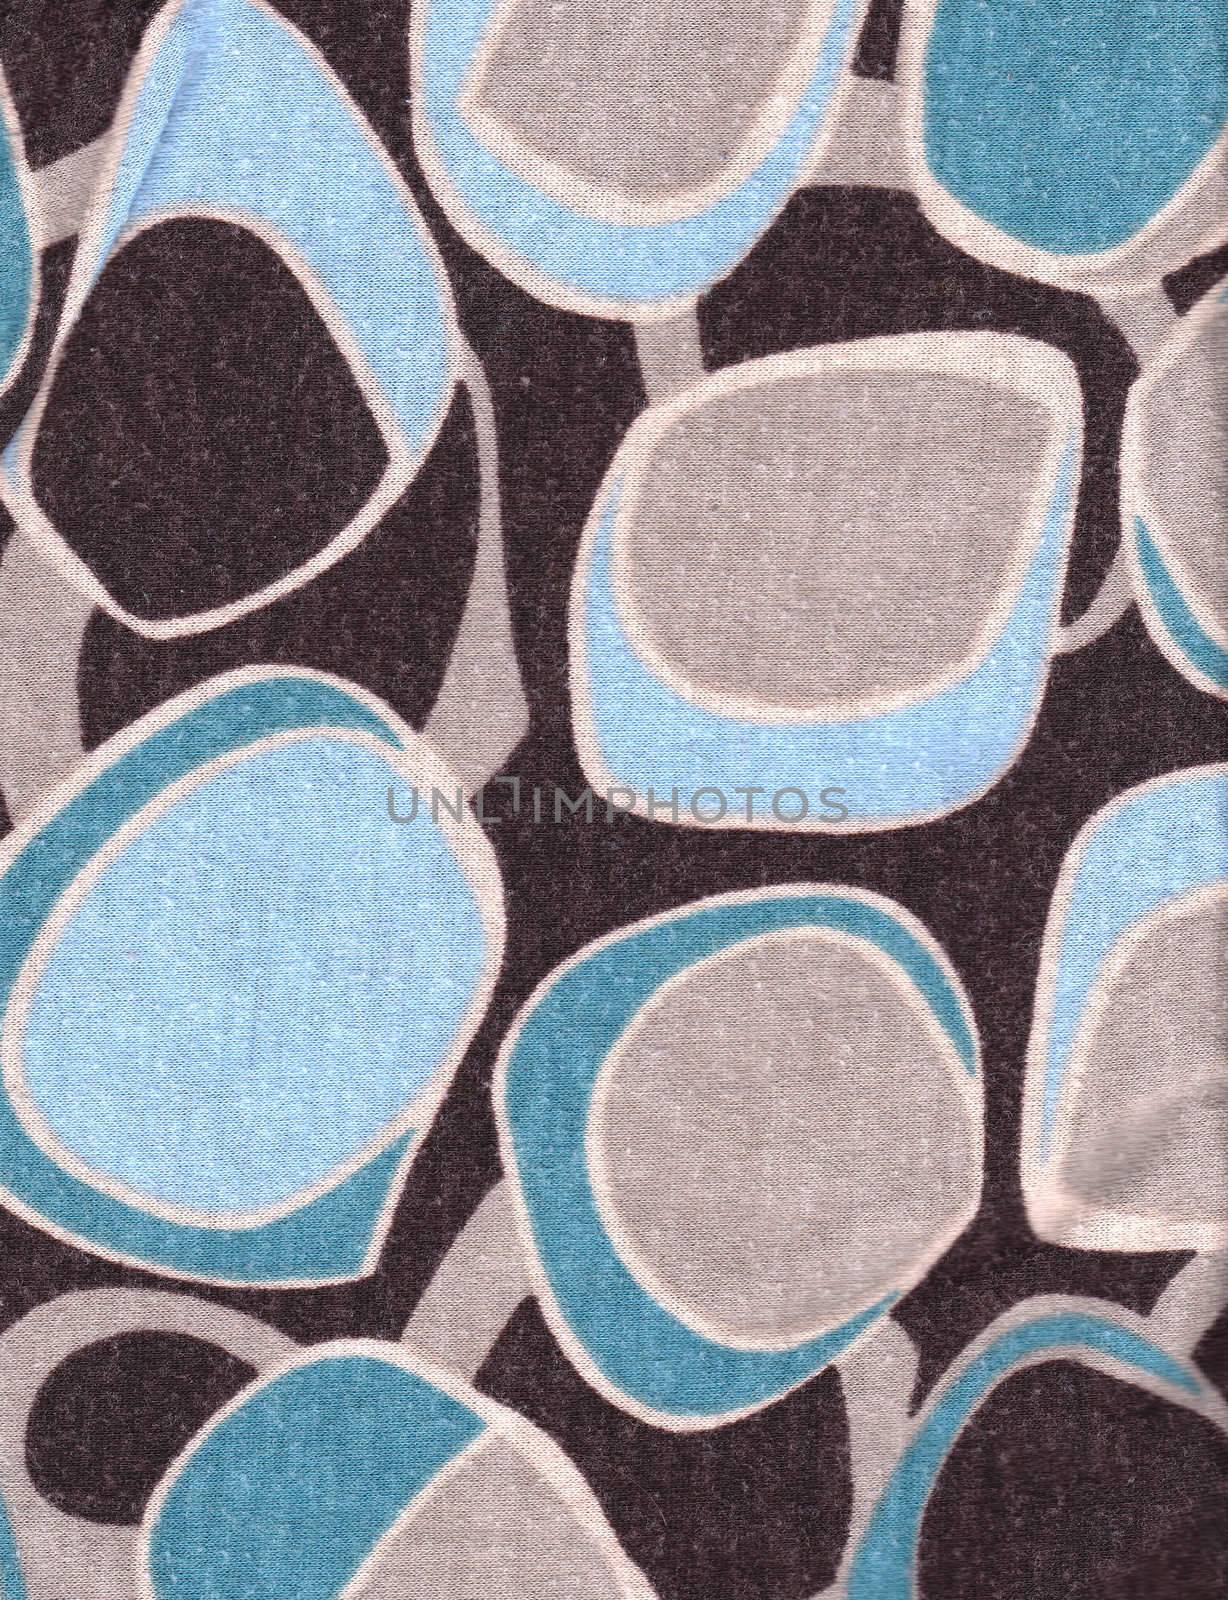 A round pattern fabric large abstract docorative scrapbook by jeremywhat